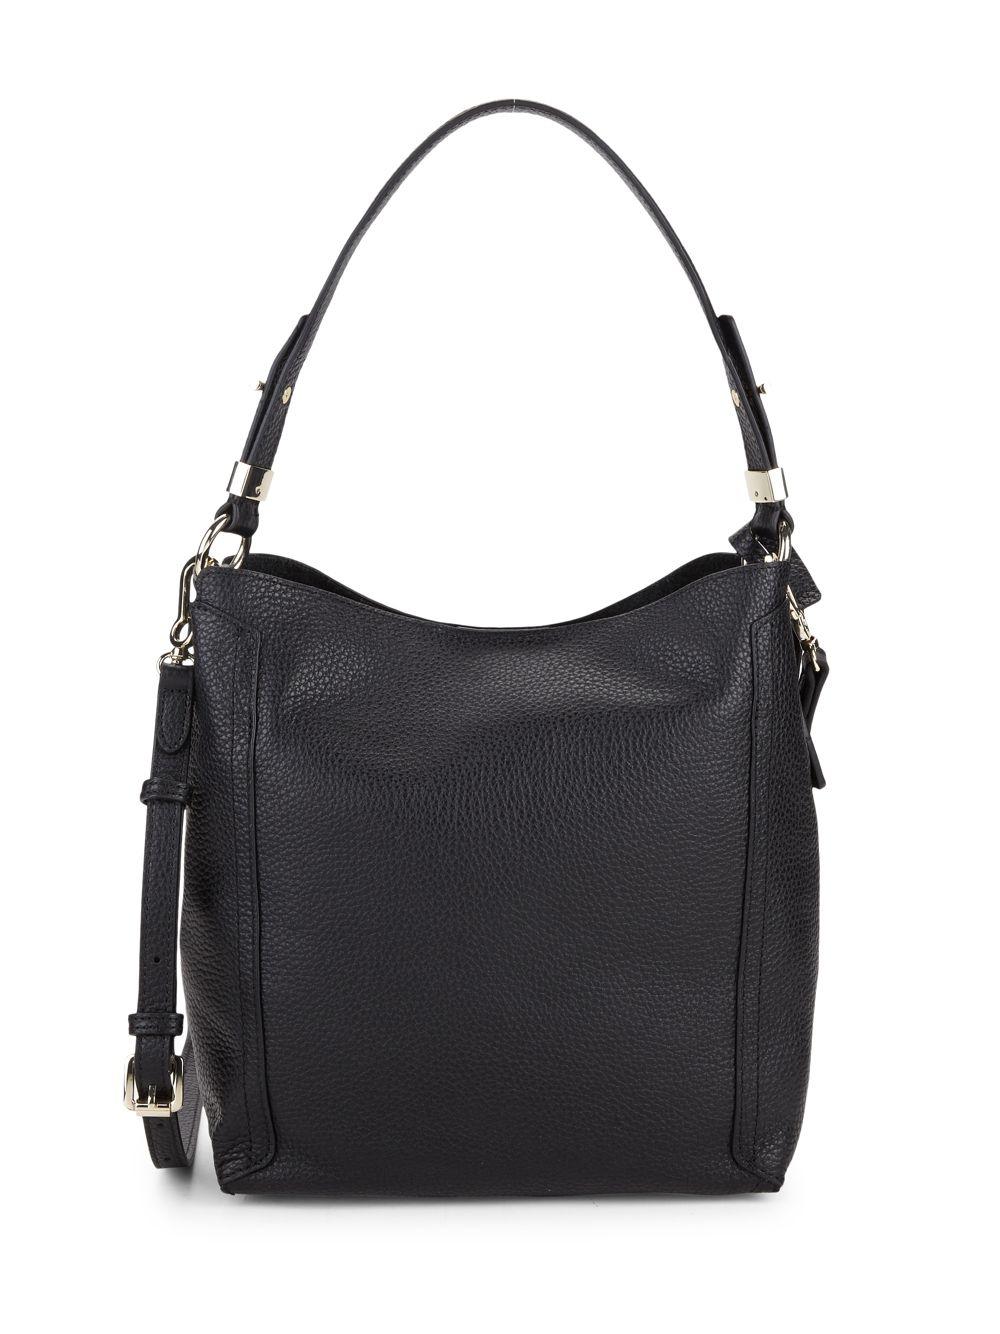 Vince Camuto Small Grained Leather Hobo Bag in Black - Lyst